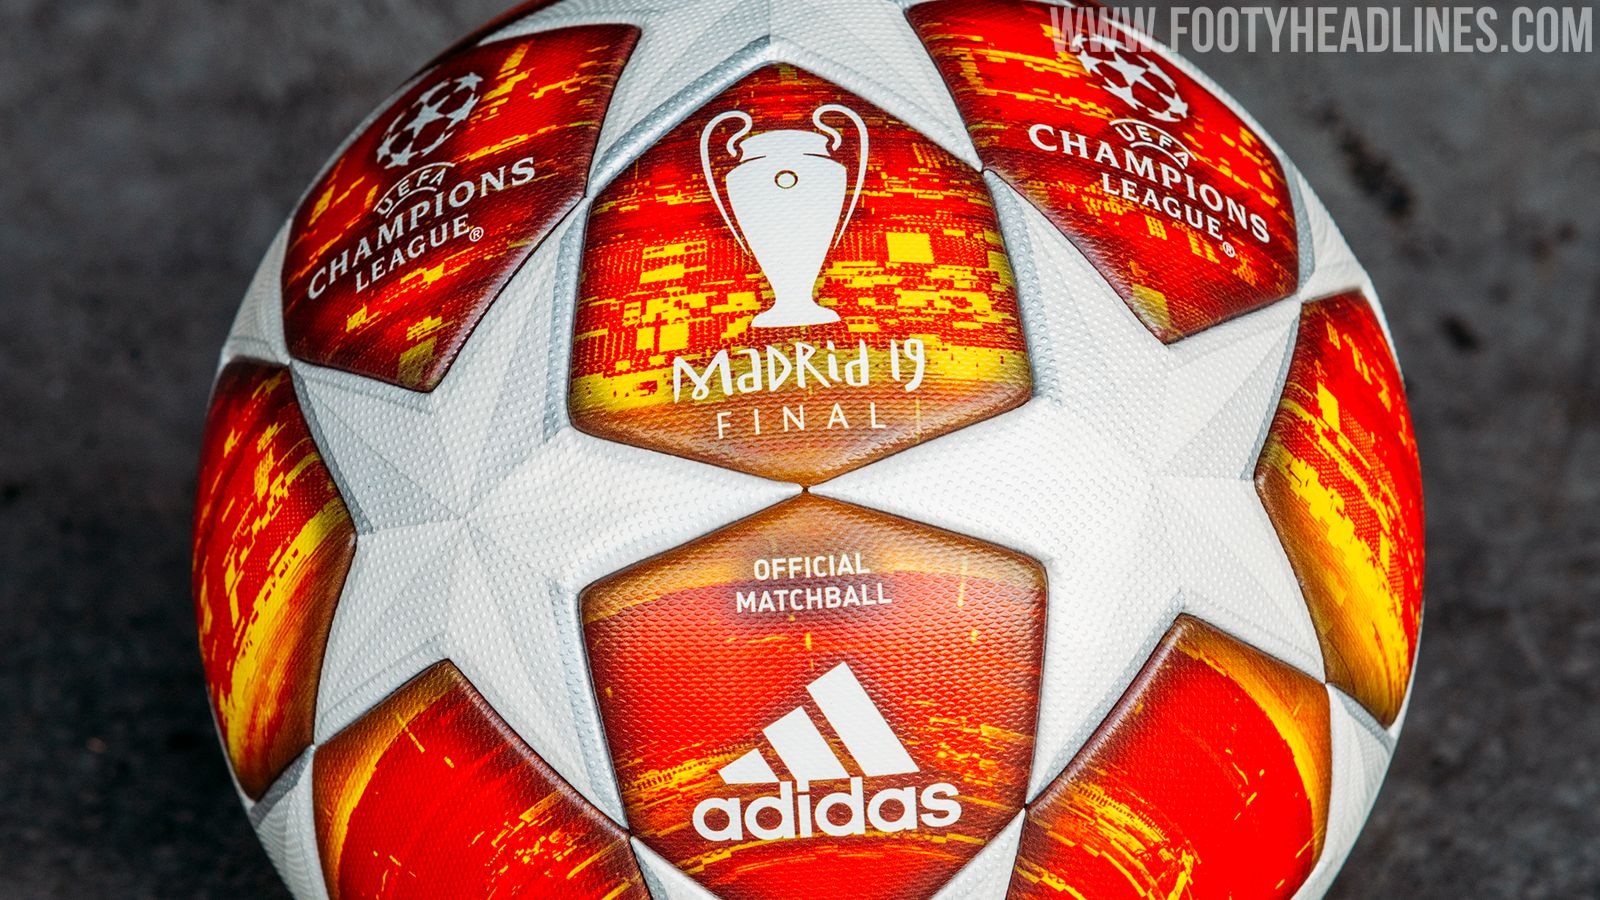 new champion league 2019/20 soccer Match Ball Size 5 fast shipping 